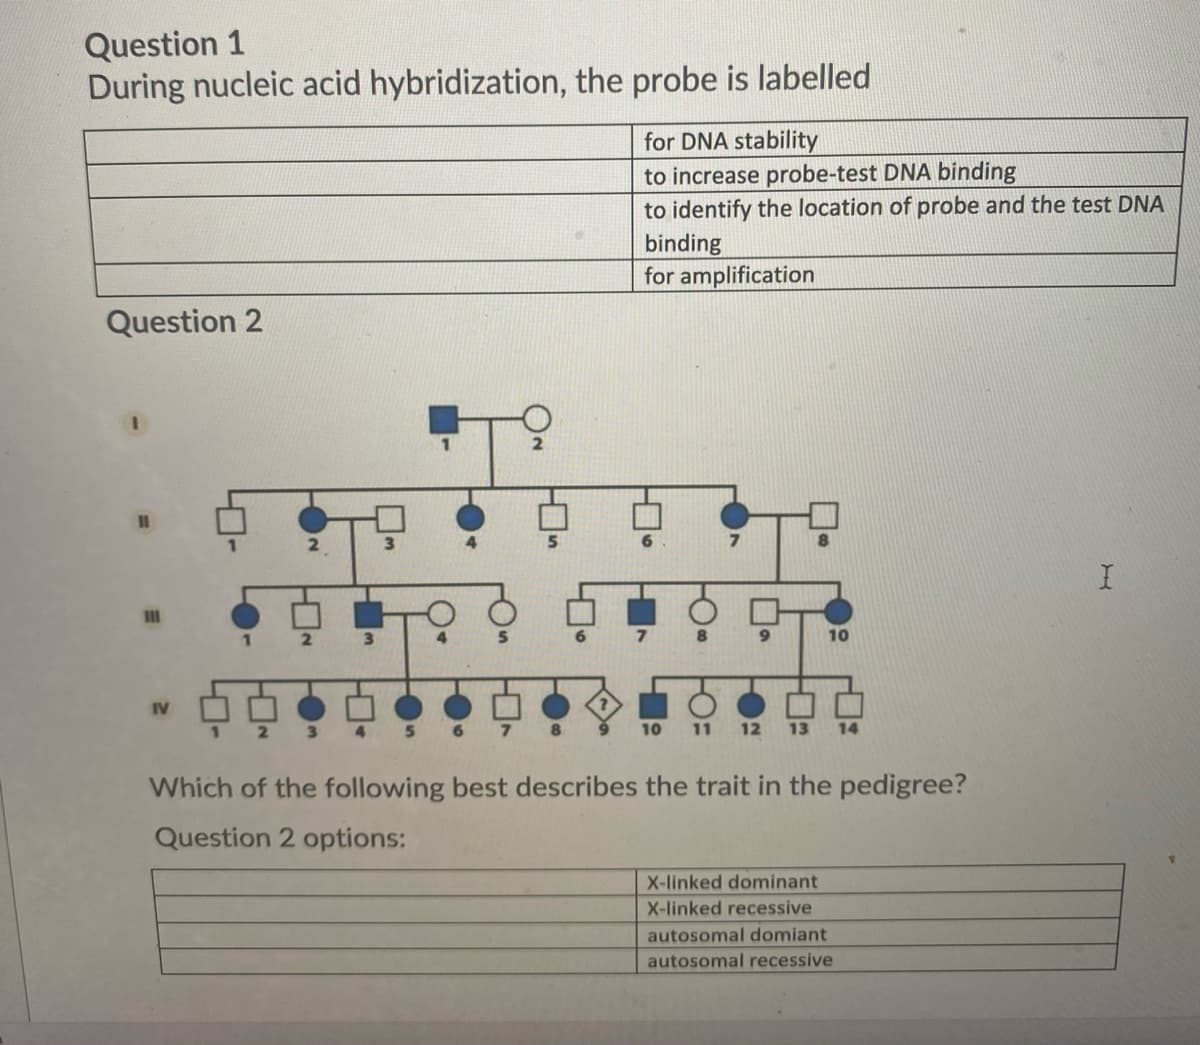 Question 1
During nucleic acid hybridization, the probe is labelled
for DNA stability
to increase probe-test DNA binding
to identify the location of probe and the test DNA
binding
for amplification
Question 2
10
IV
8
10
11
12
13
14
Which of the following best describes the trait in the pedigree?
Question 2 options:
X-linked dominant
X-linked recessive
autosomal domiant
autosomal recessive
